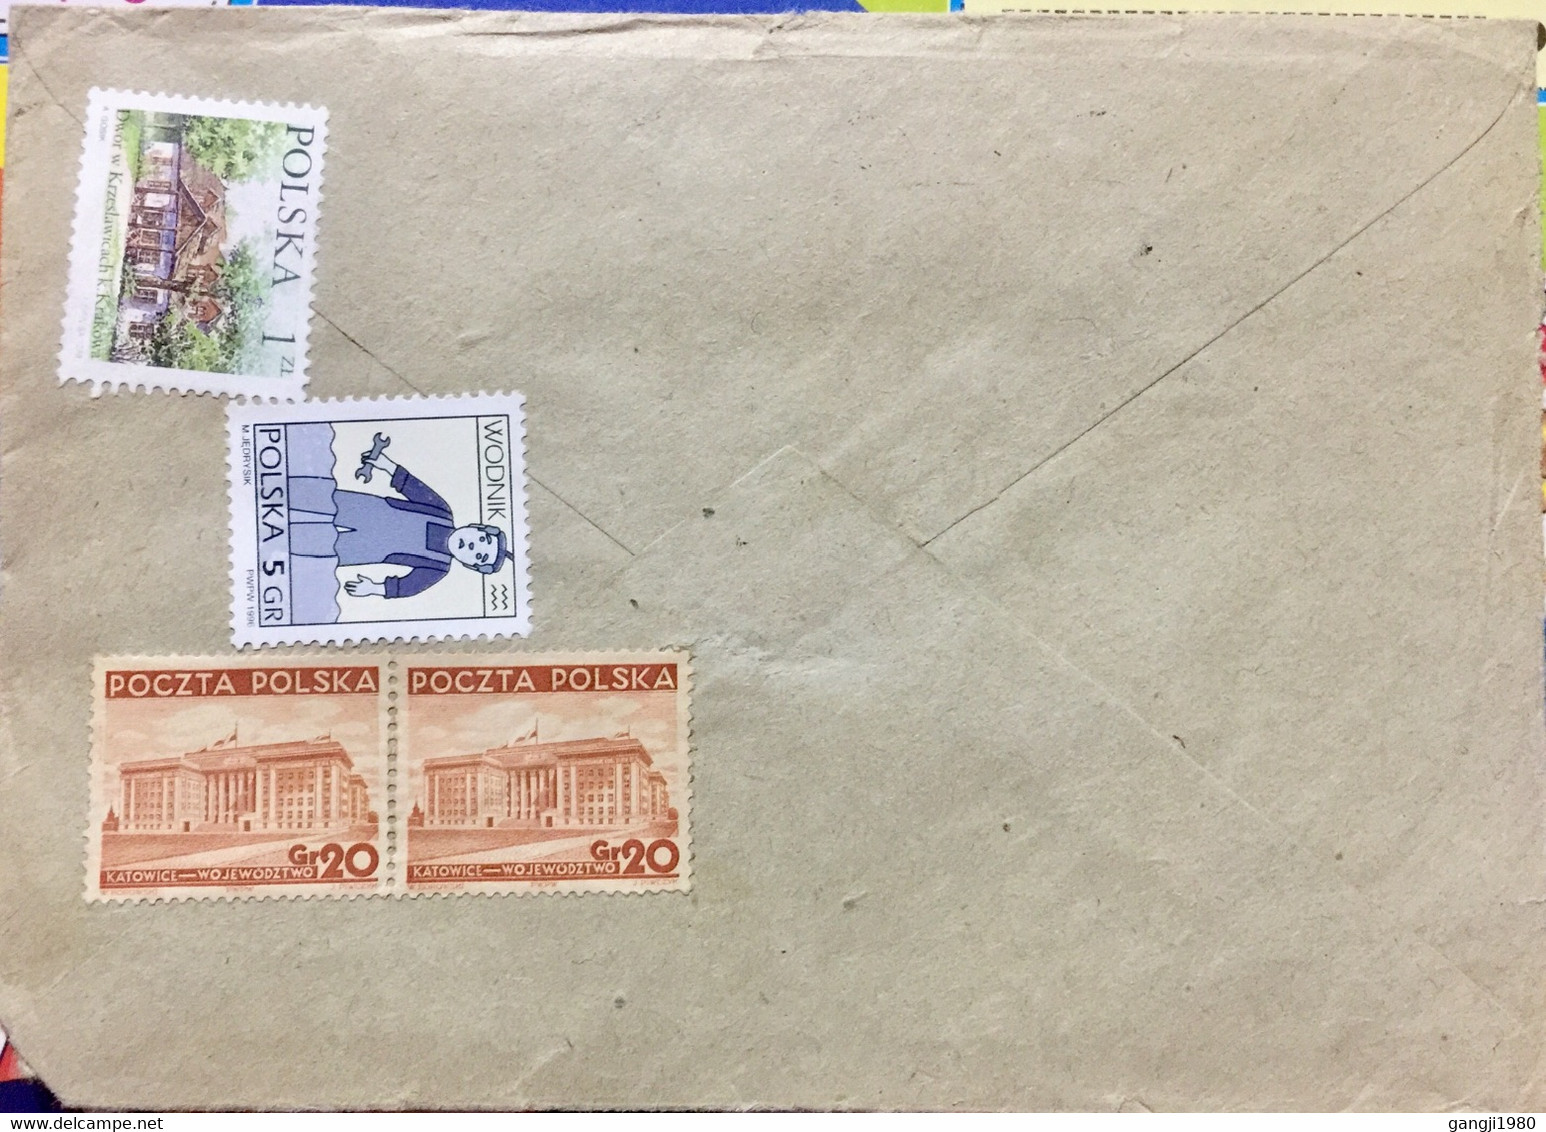 POLAND 2000, USED AIRMAIL COVER TO INDIA 4 DIFFERENT 1958 PICTURAL SPECIAL CANCELLATION, KATOWIDE ,HOUSE MUSIC,BUILDIN, - Lettres & Documents